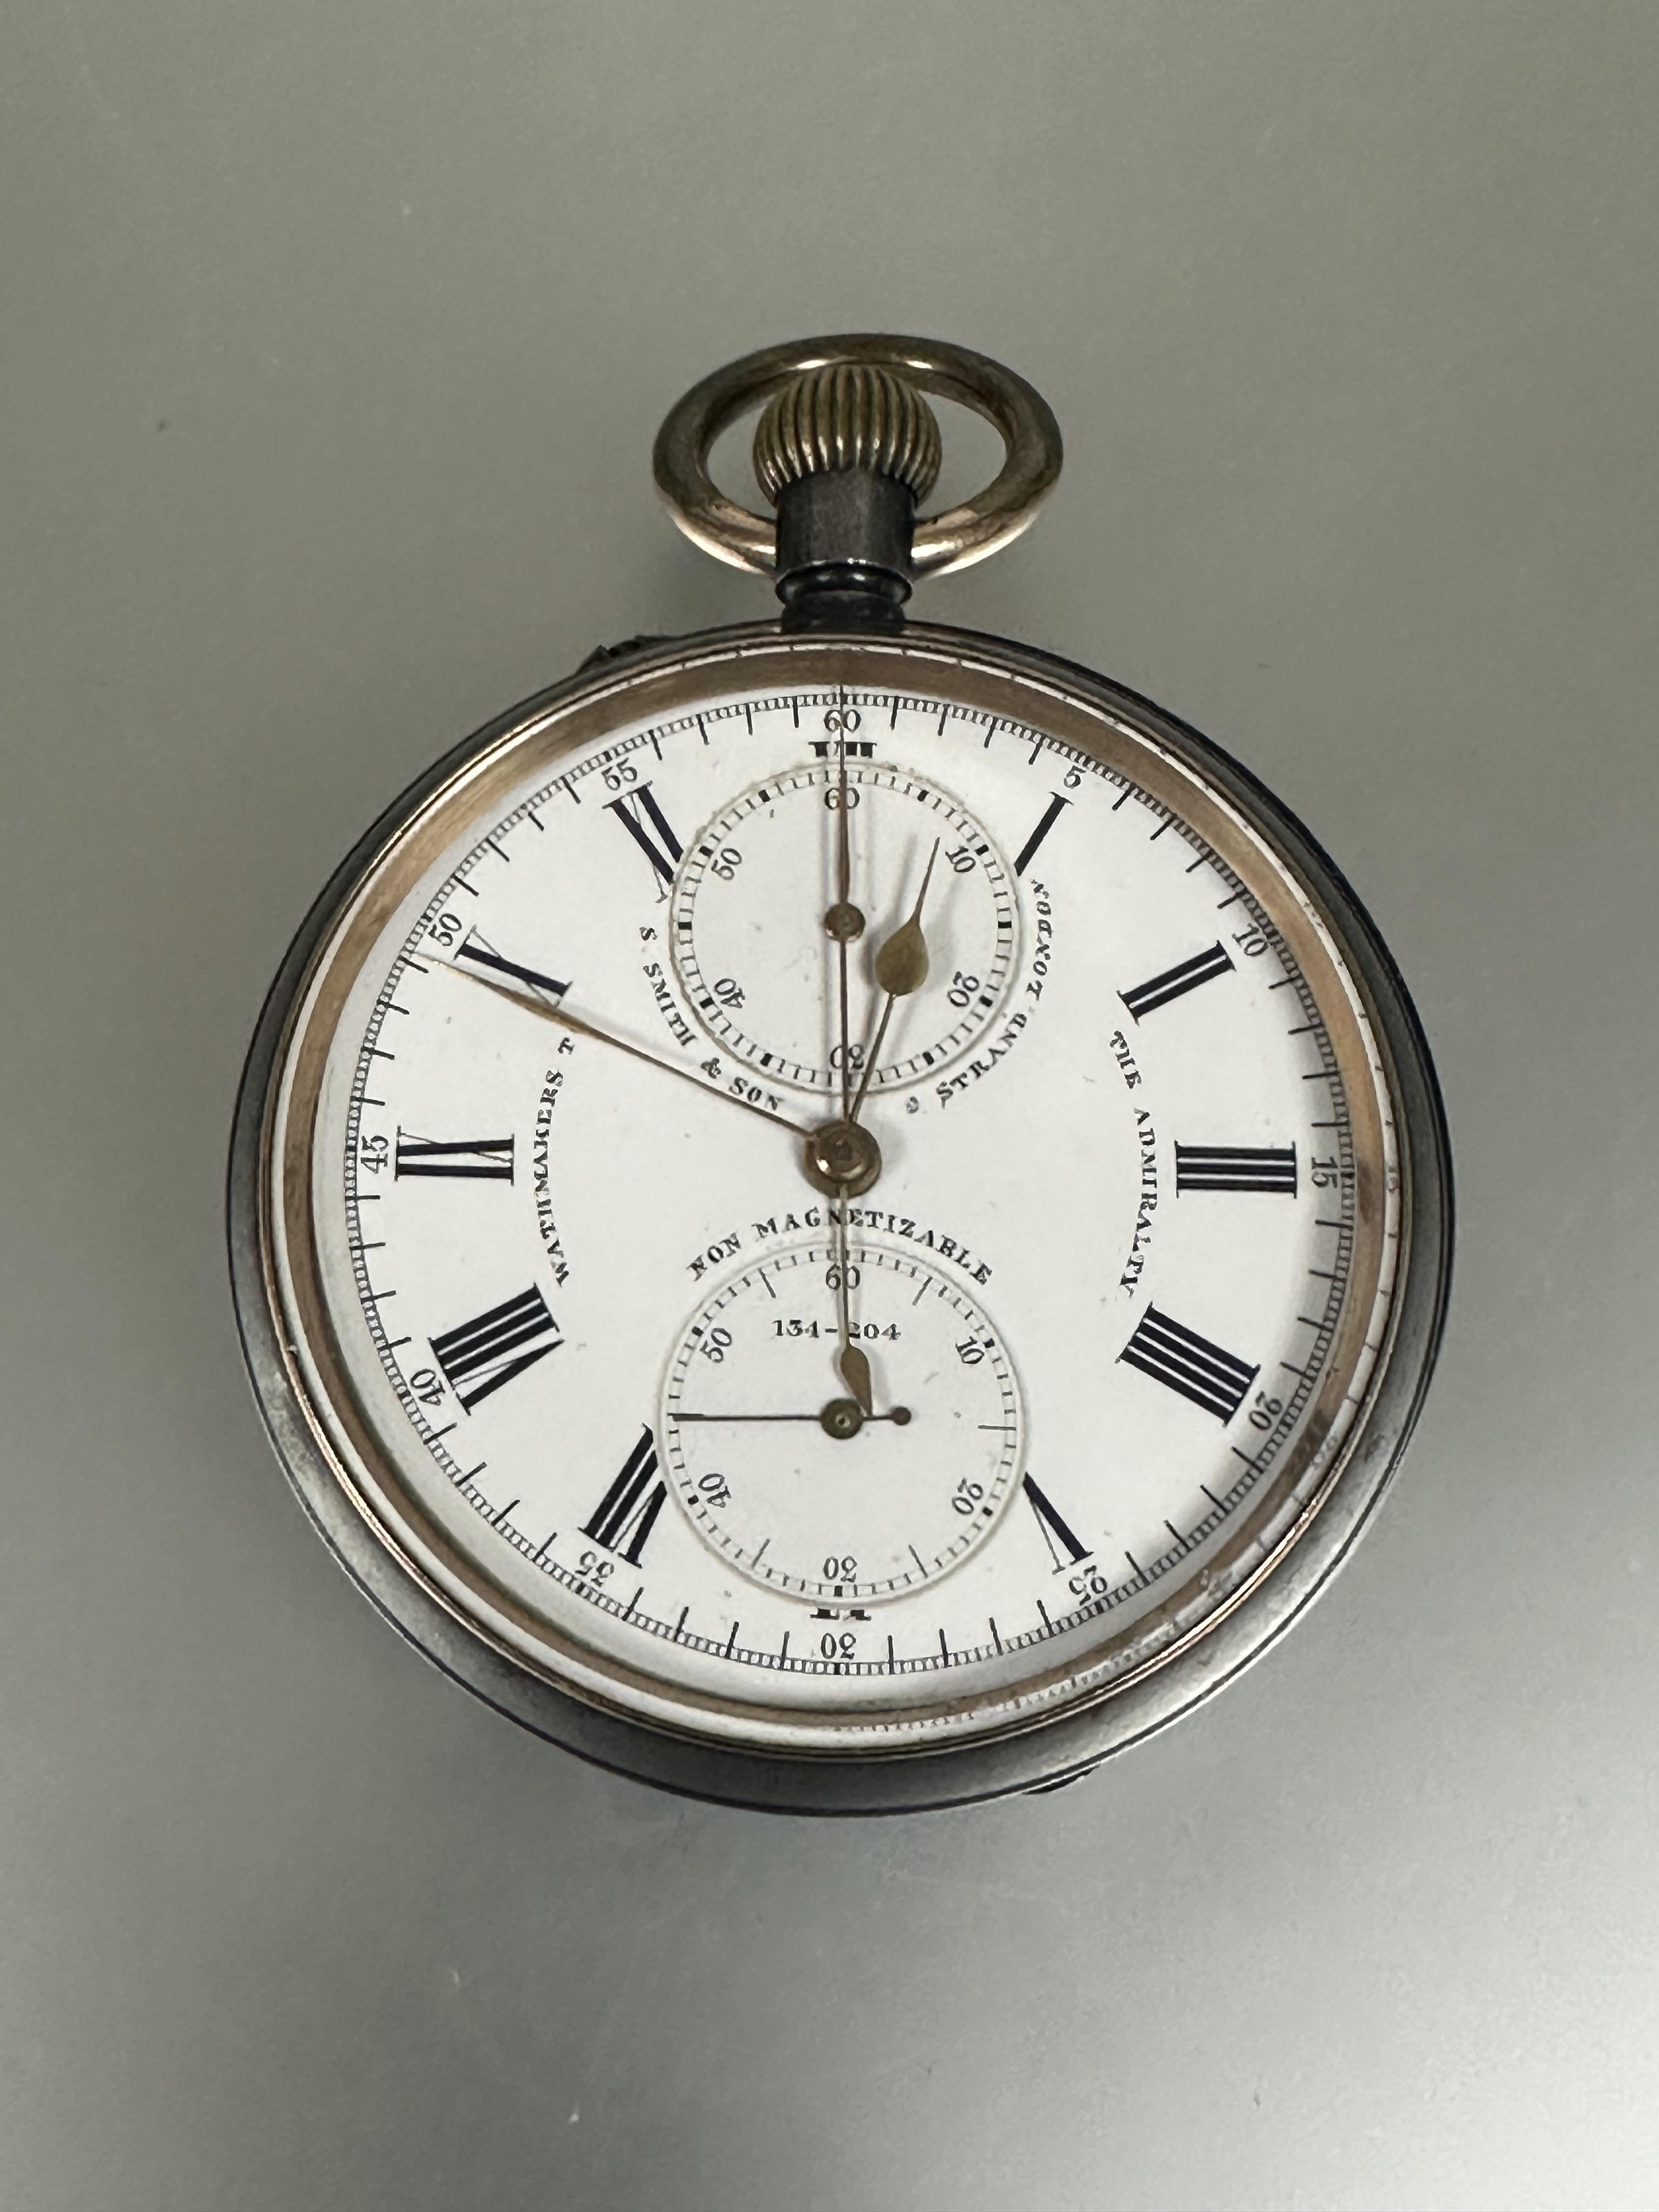 A S. Smith & Son Watchmakers to the Admiralty 9 The Strand London open face gunmetal cased pocket